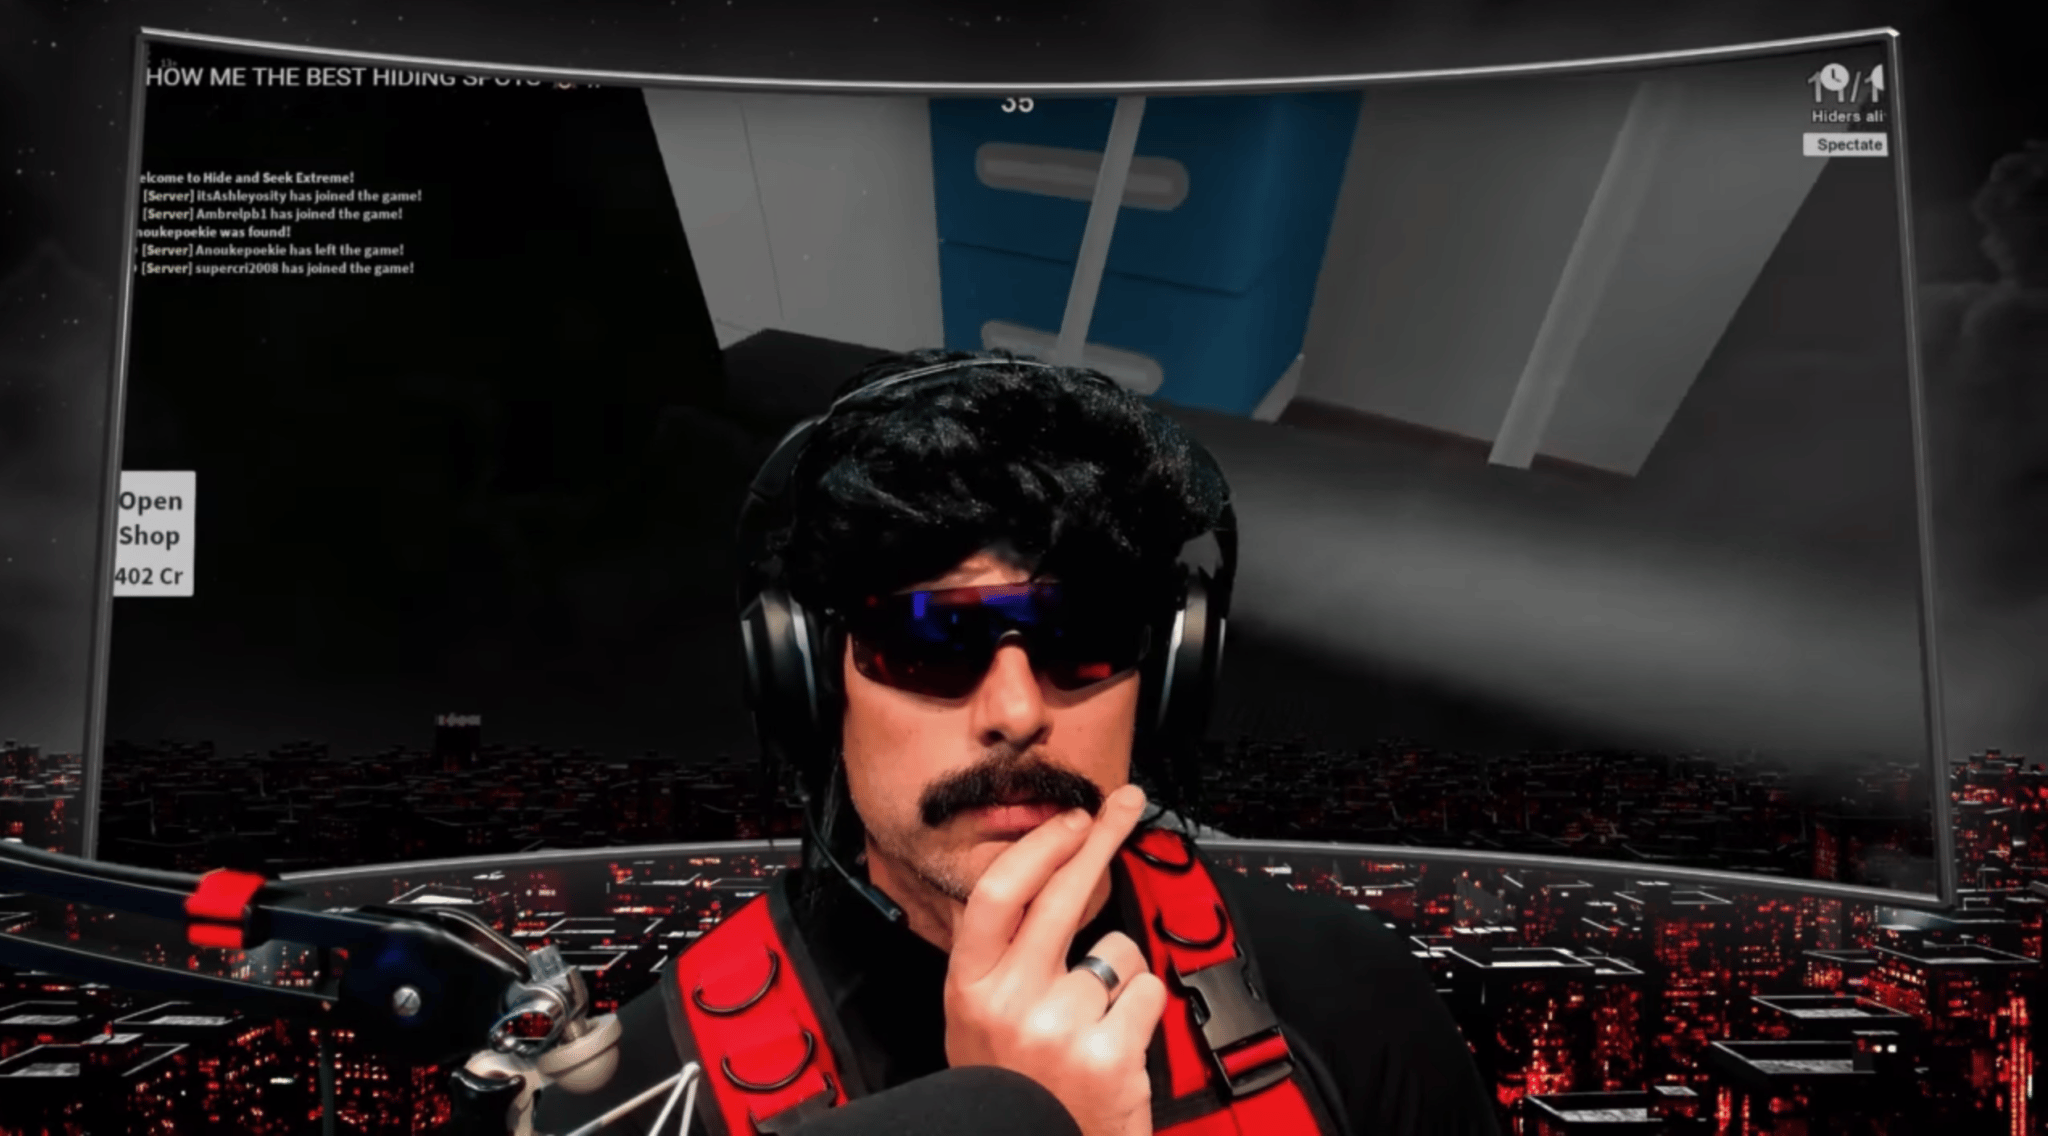 Dr Disrespect during his final Twitch stream on June 25.